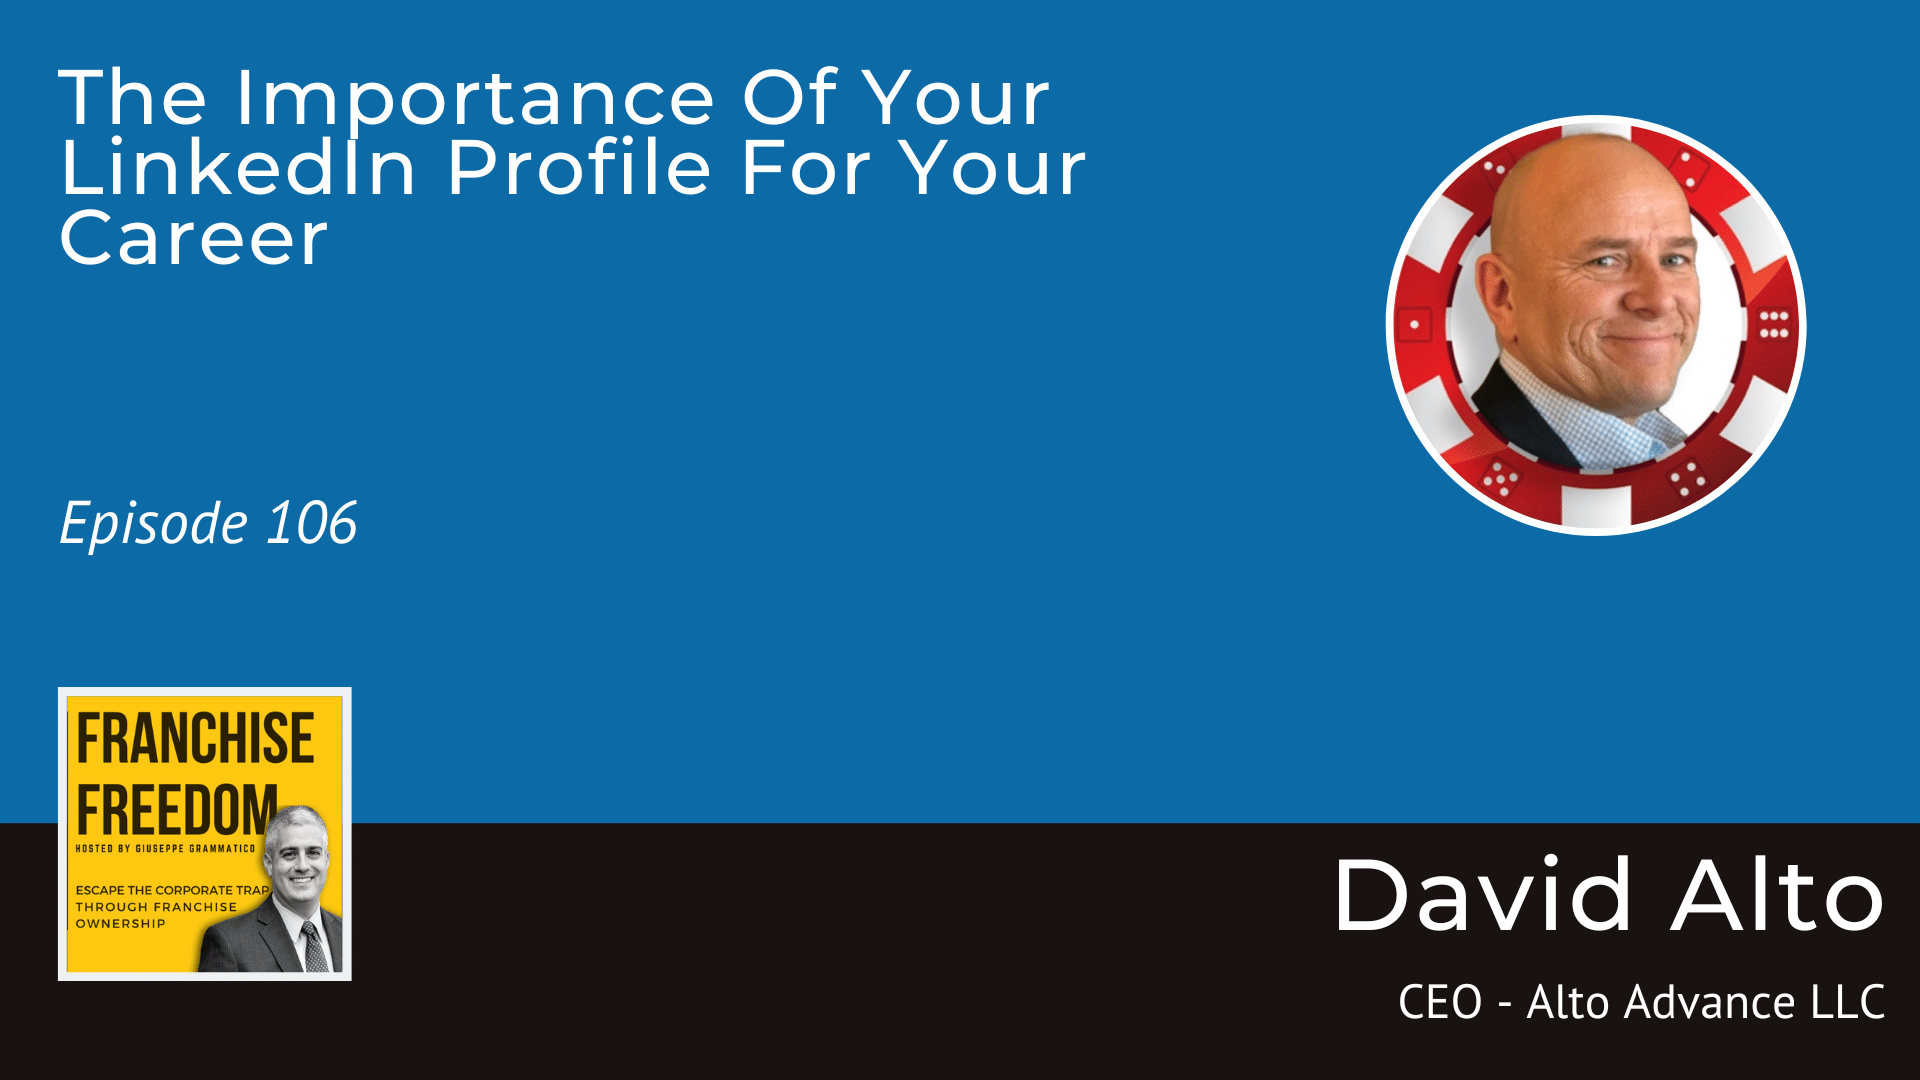 The Importance Of Your LinkedIn Profile For Your Career